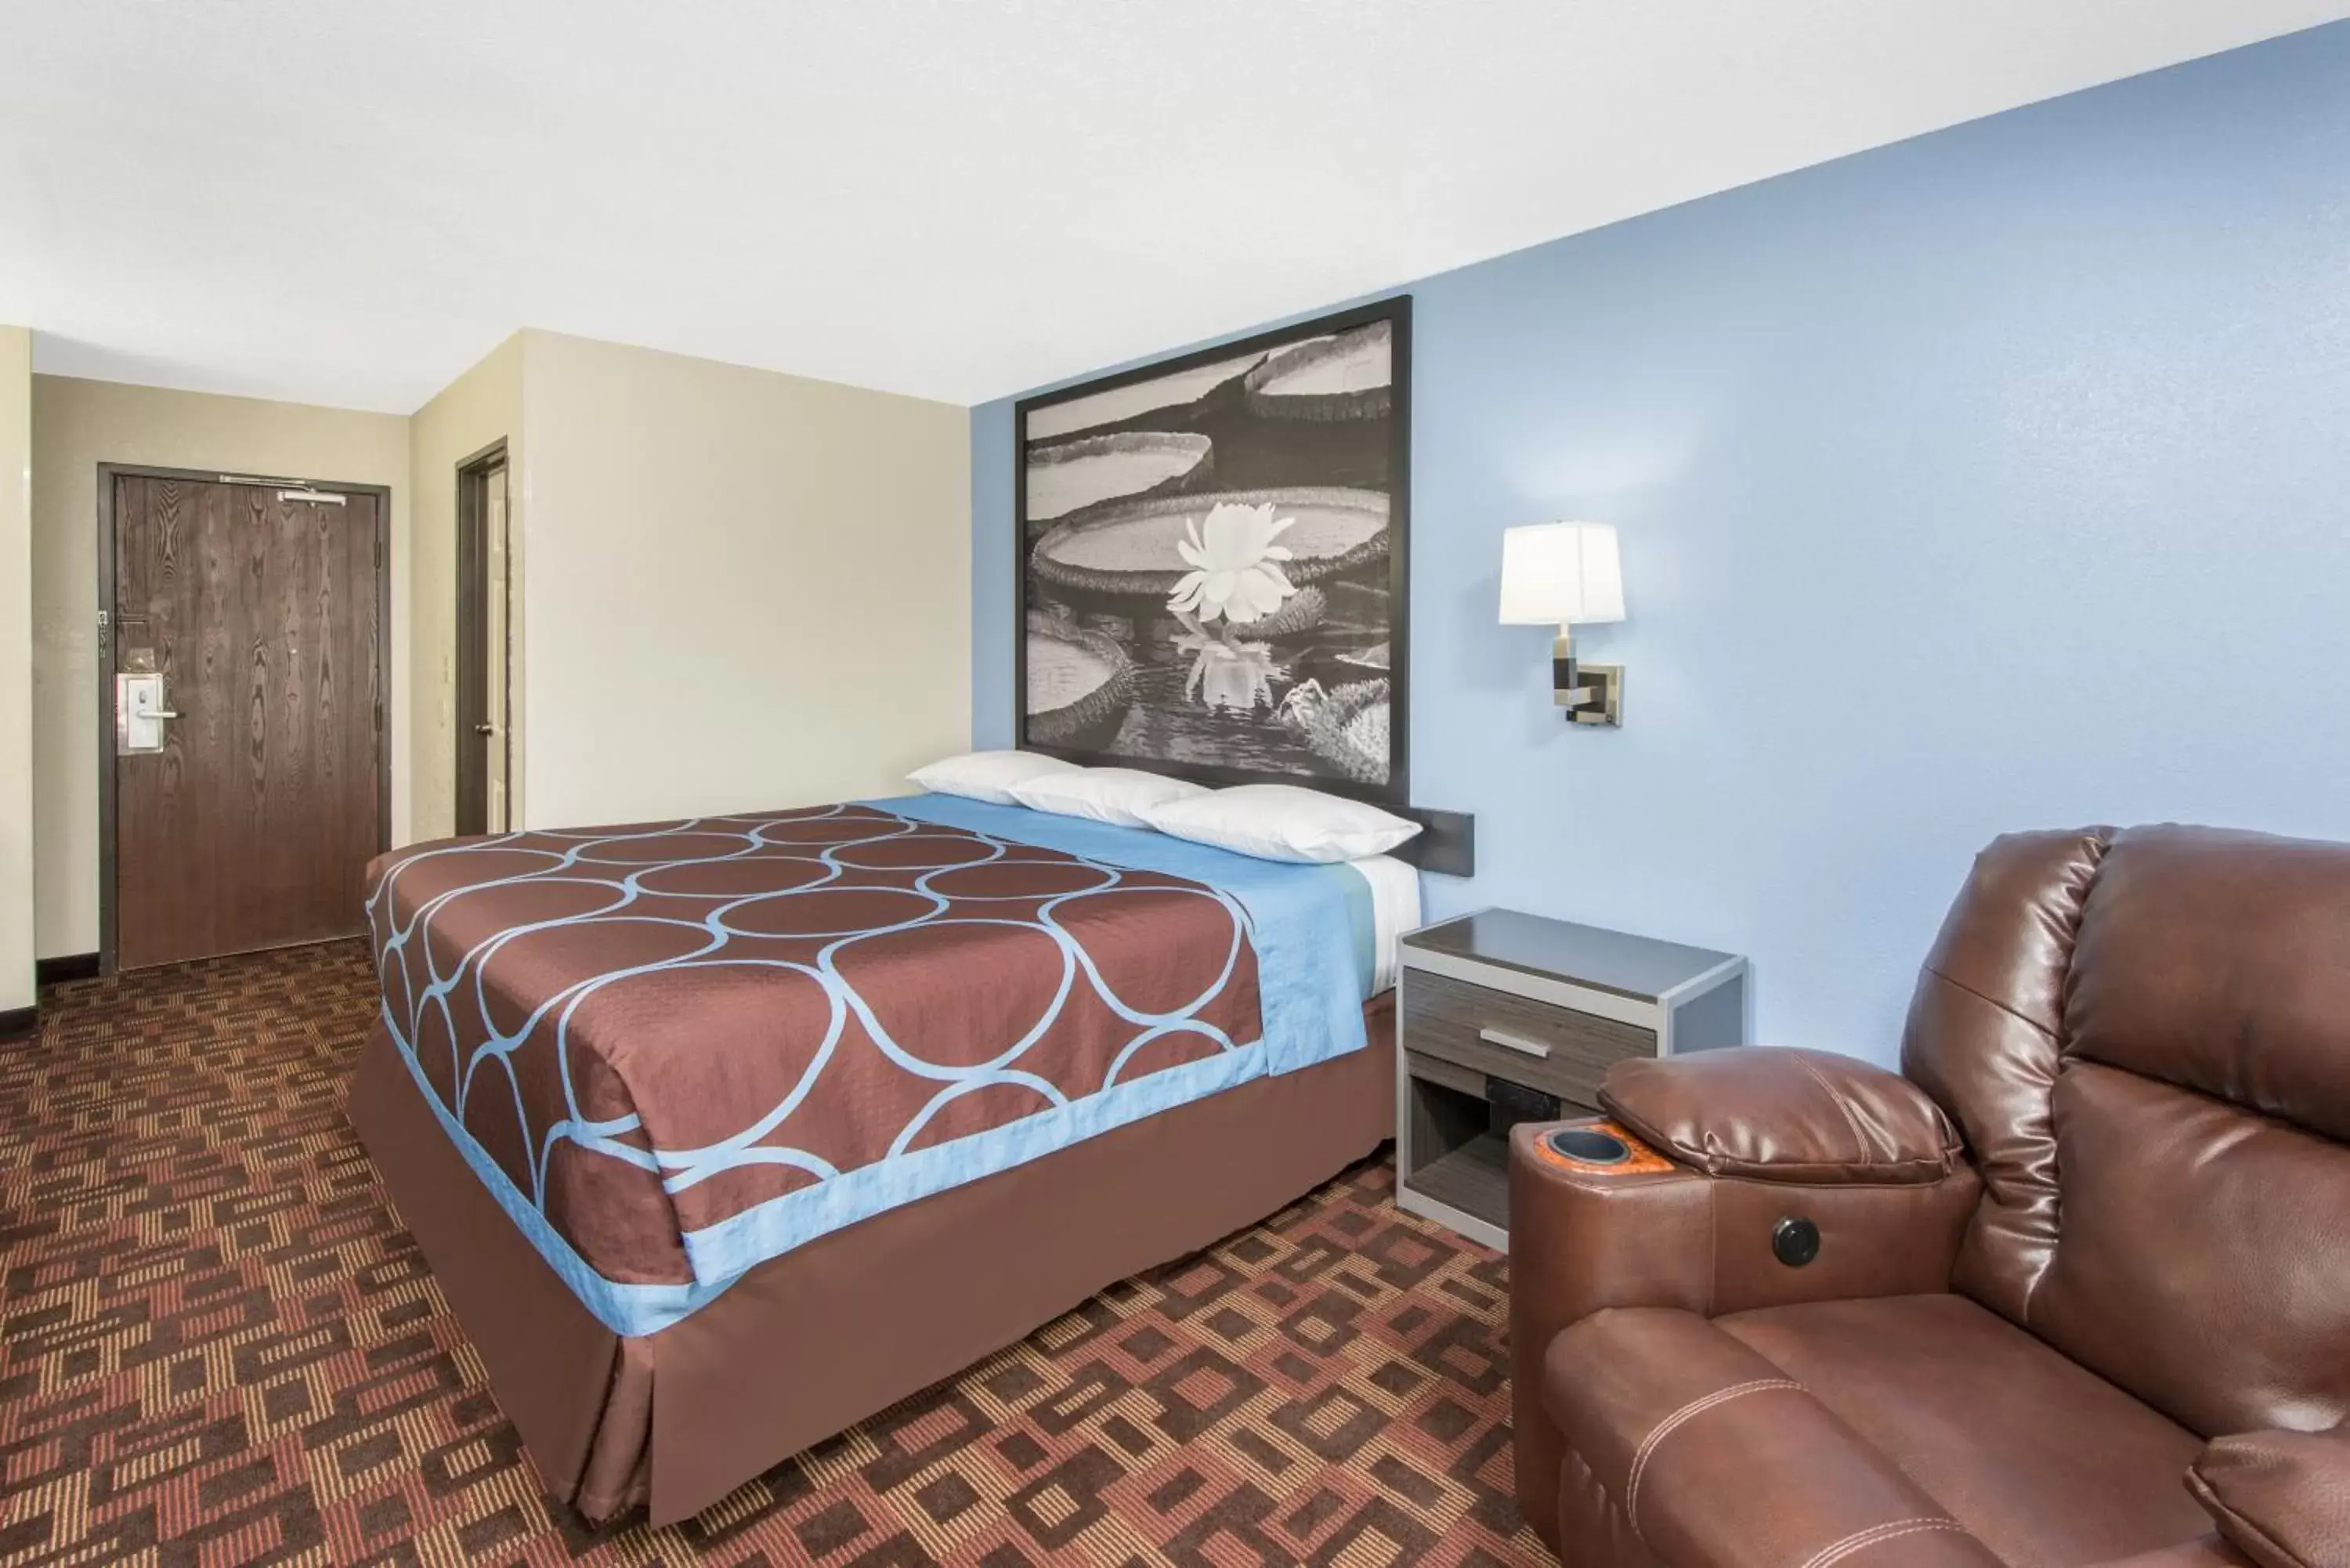 Bed in Super 8 by Wyndham Moberly MO